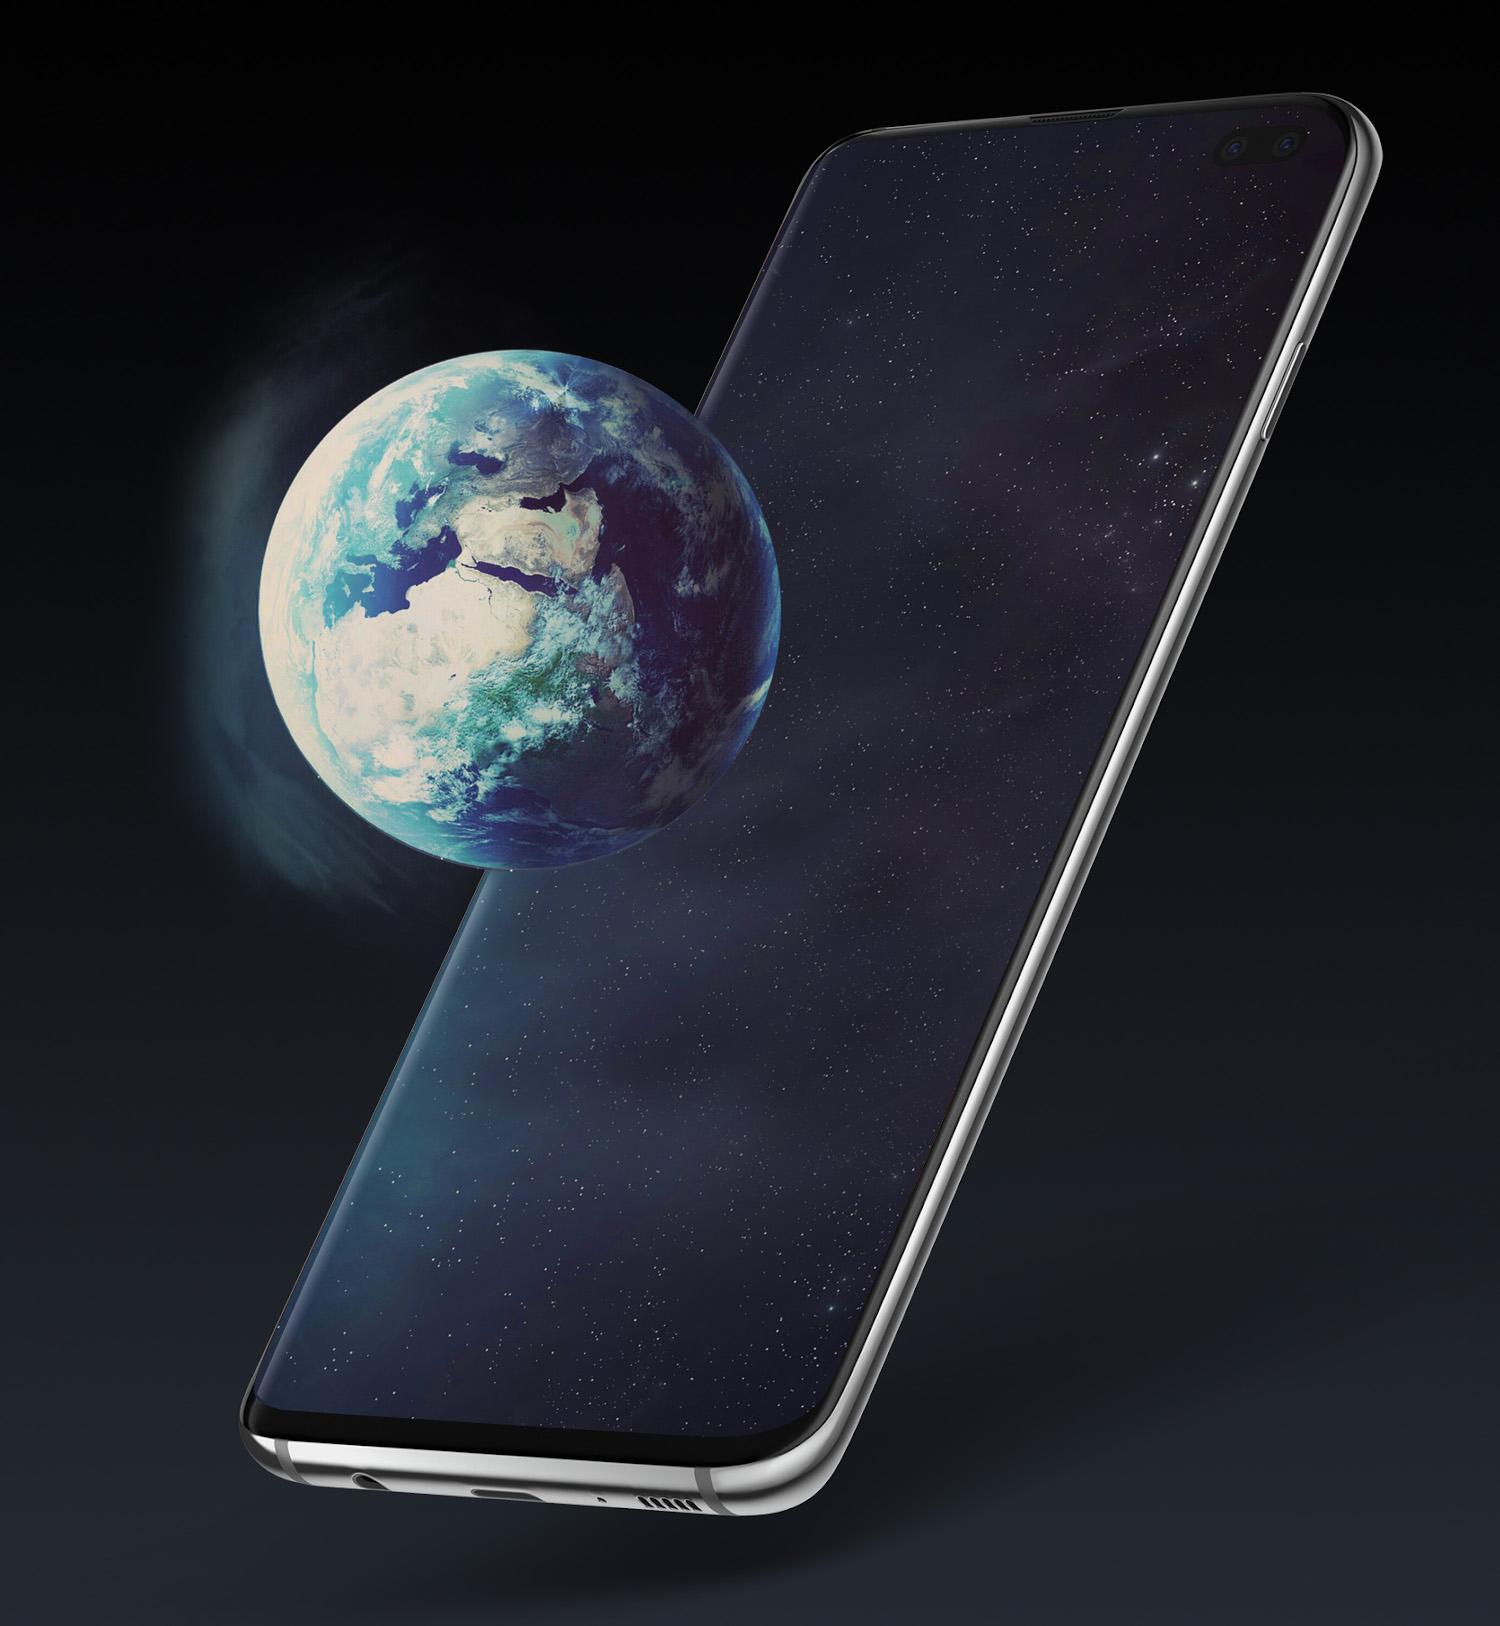 Wallpapers Backgrounds Lockscreen 3d Effect For Android Apk Download